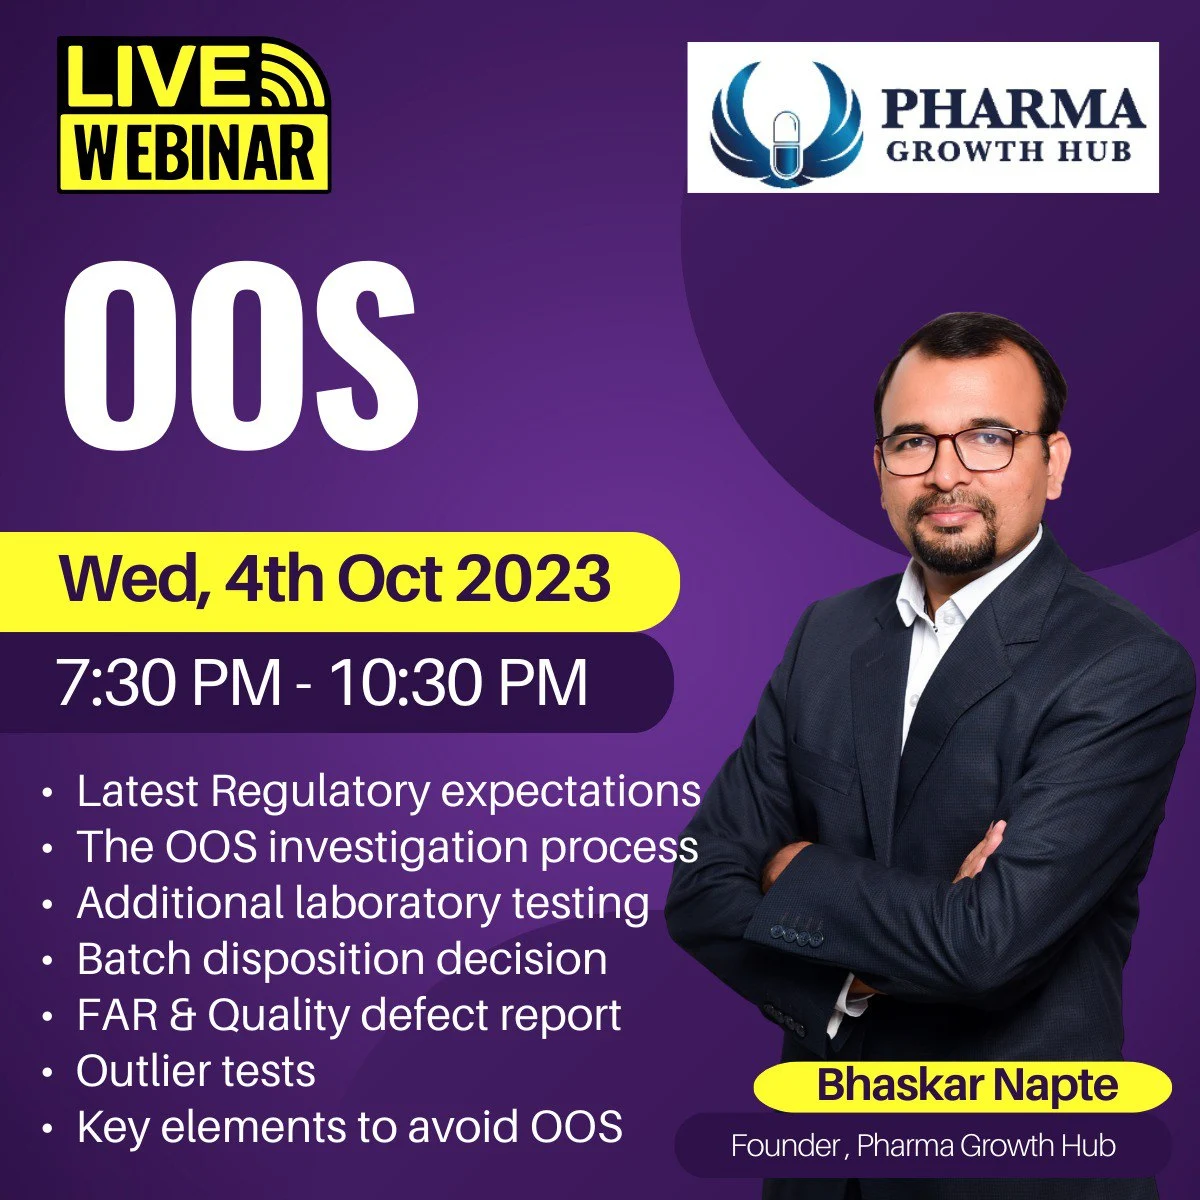 Online Workshop, Handling of OOS Results, USFDA, MHRA, Free Registration, Compliant Laboratory, OOS Investigation, Phase I, II, & III Investigation, Additional Laboratory Testing, Batch Disposition Decision, FAR (Failure Analysis Report), Quality Defect Report, Outlier Tests, Statistical Evaluation, Pharma Event, Online Webinar.